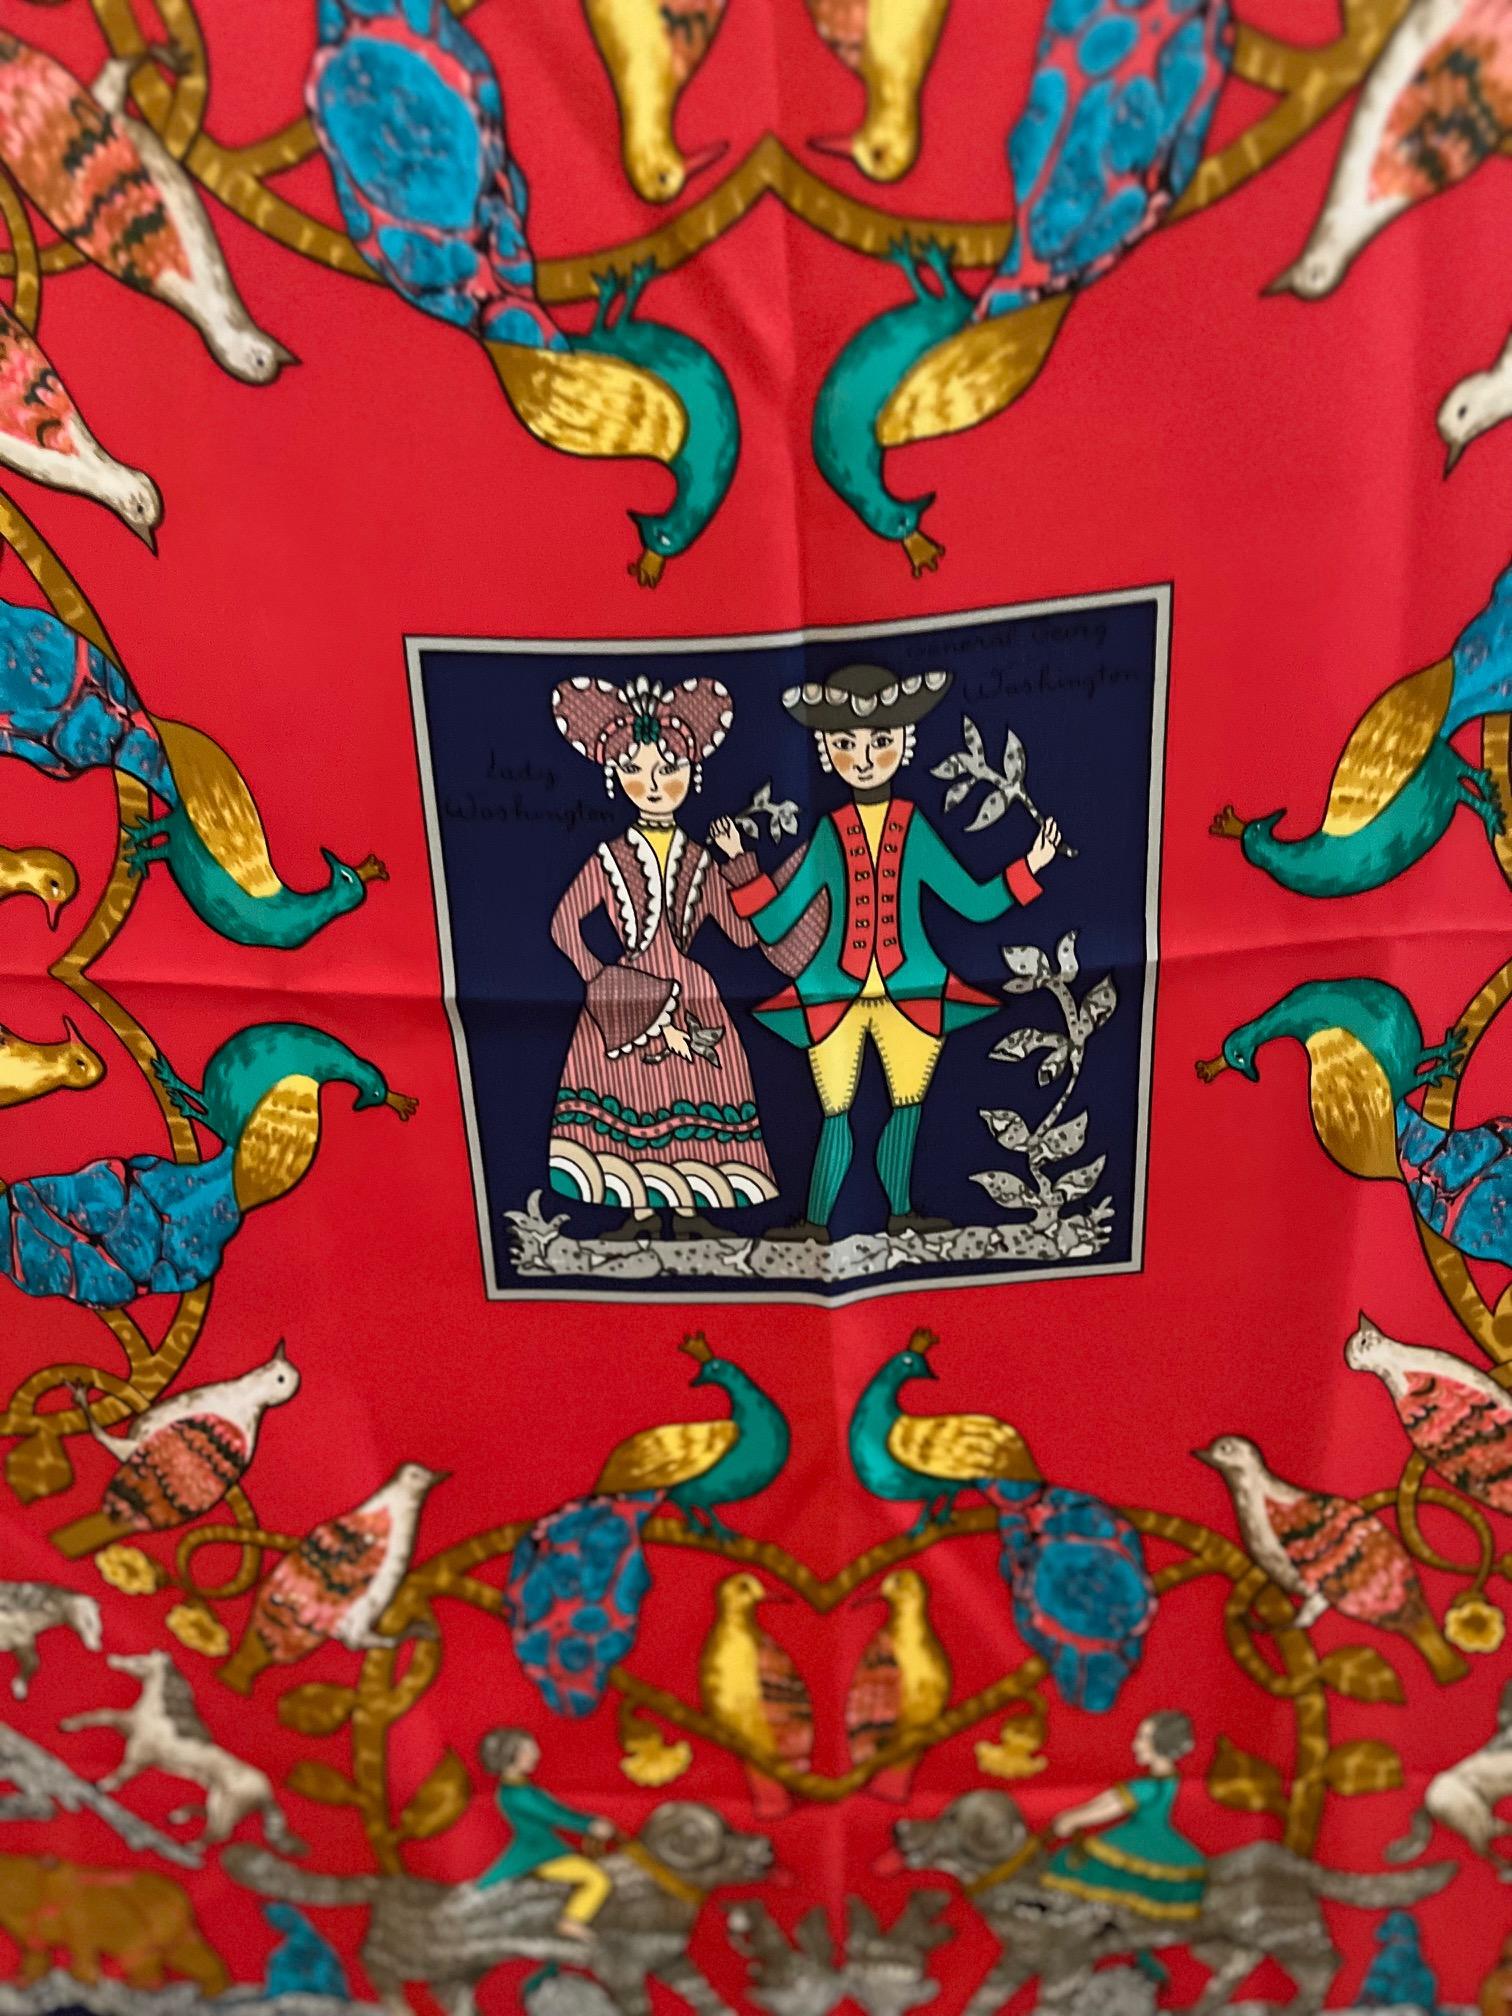 Designed by Francoise de la Perriere in 2012, this scarf called 